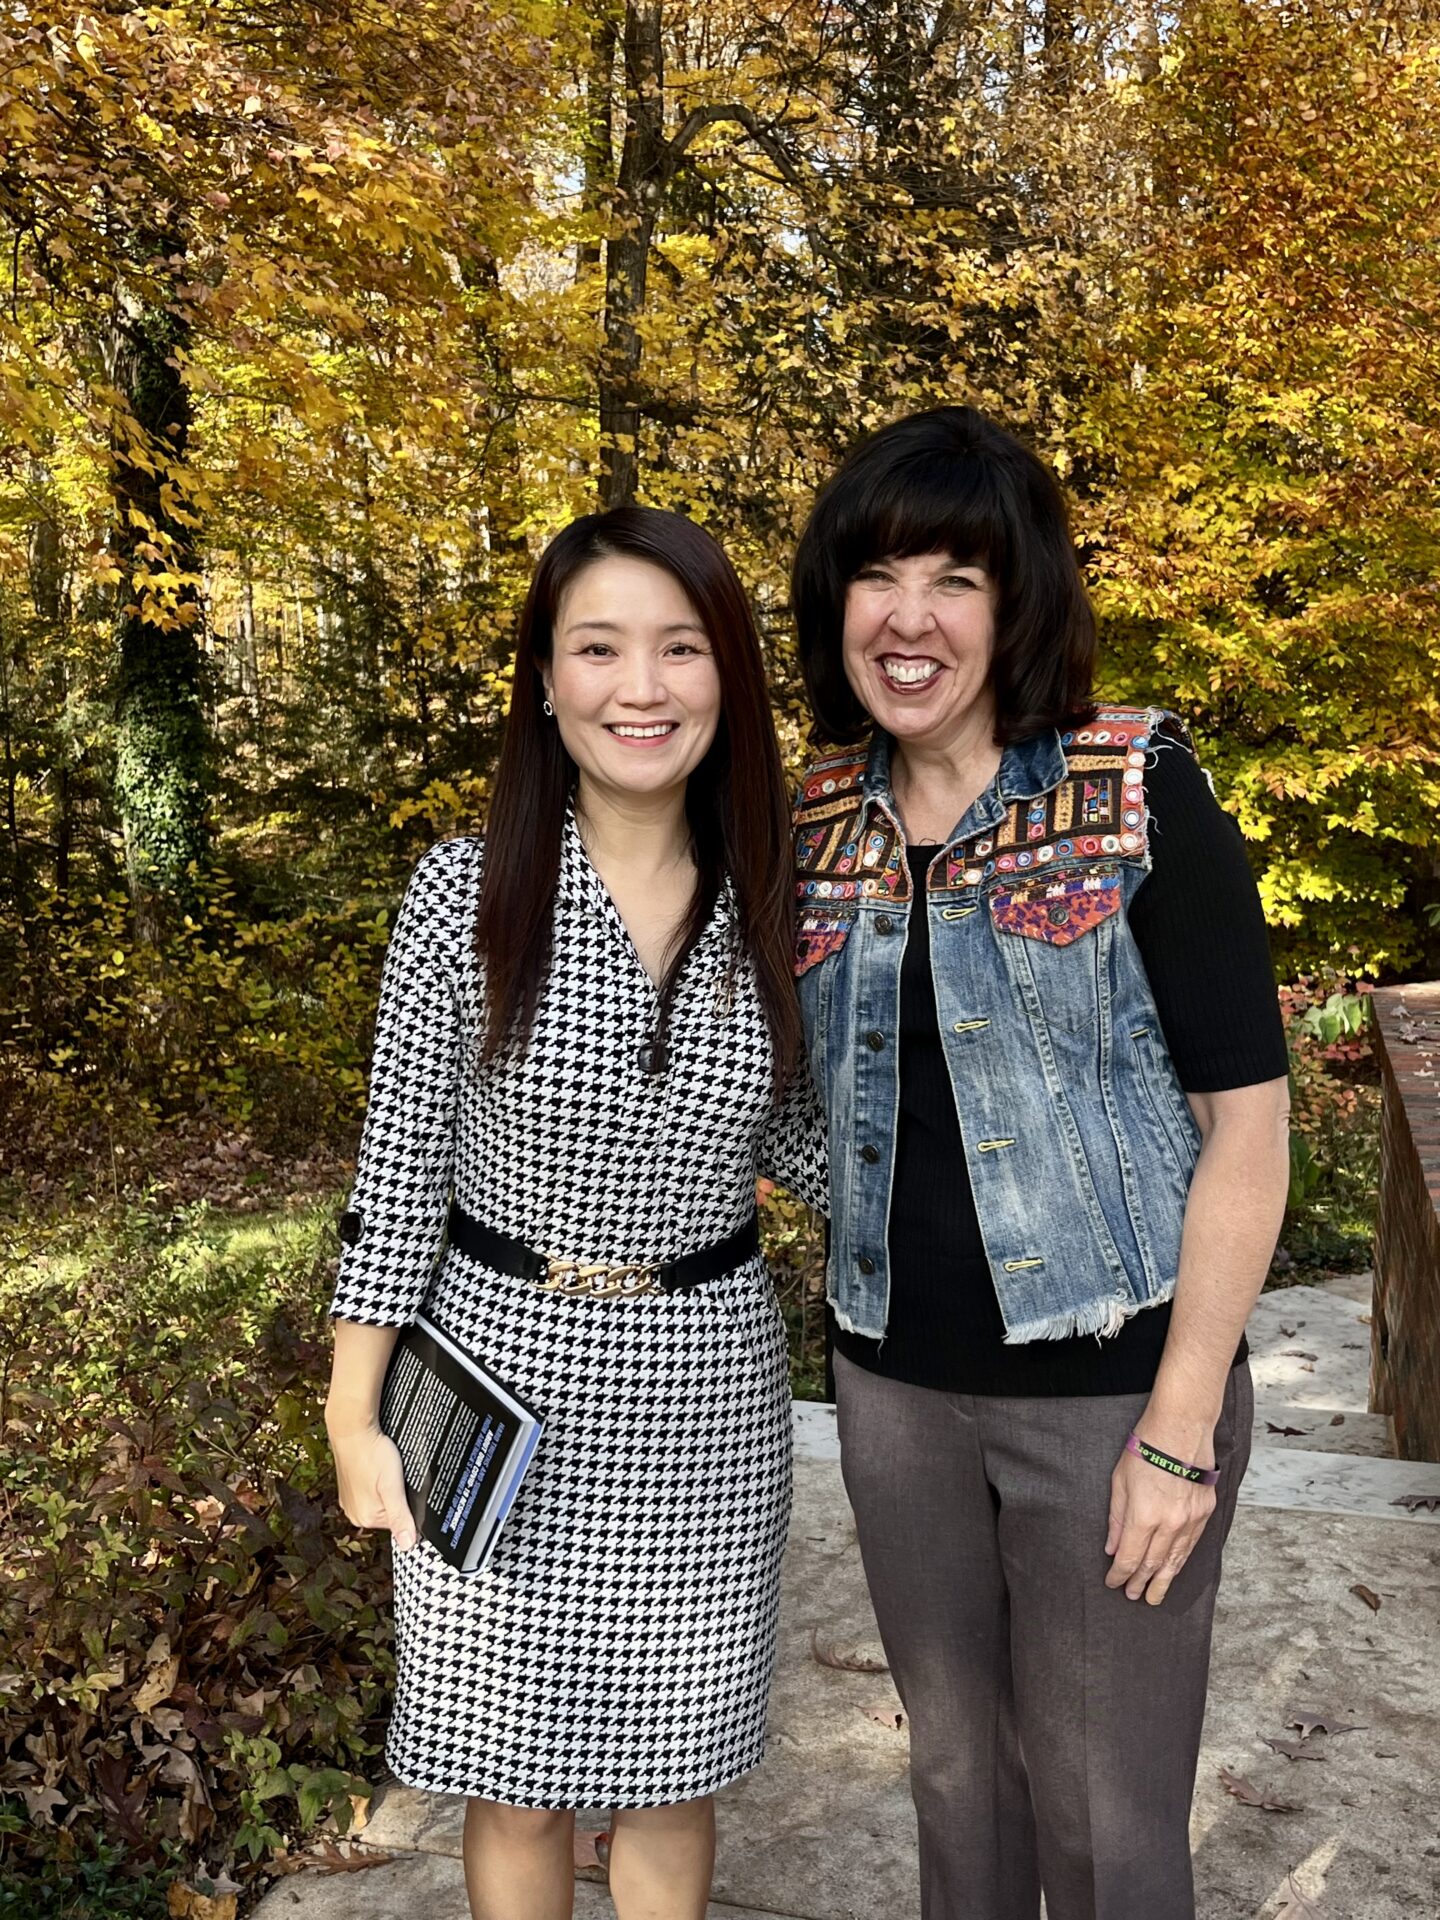 Kei extends a warm welcome to Anne Hazlett, Senior Director for Government Relations and Public Affairs at Purdue University, to discuss the Indiana health initiatives.